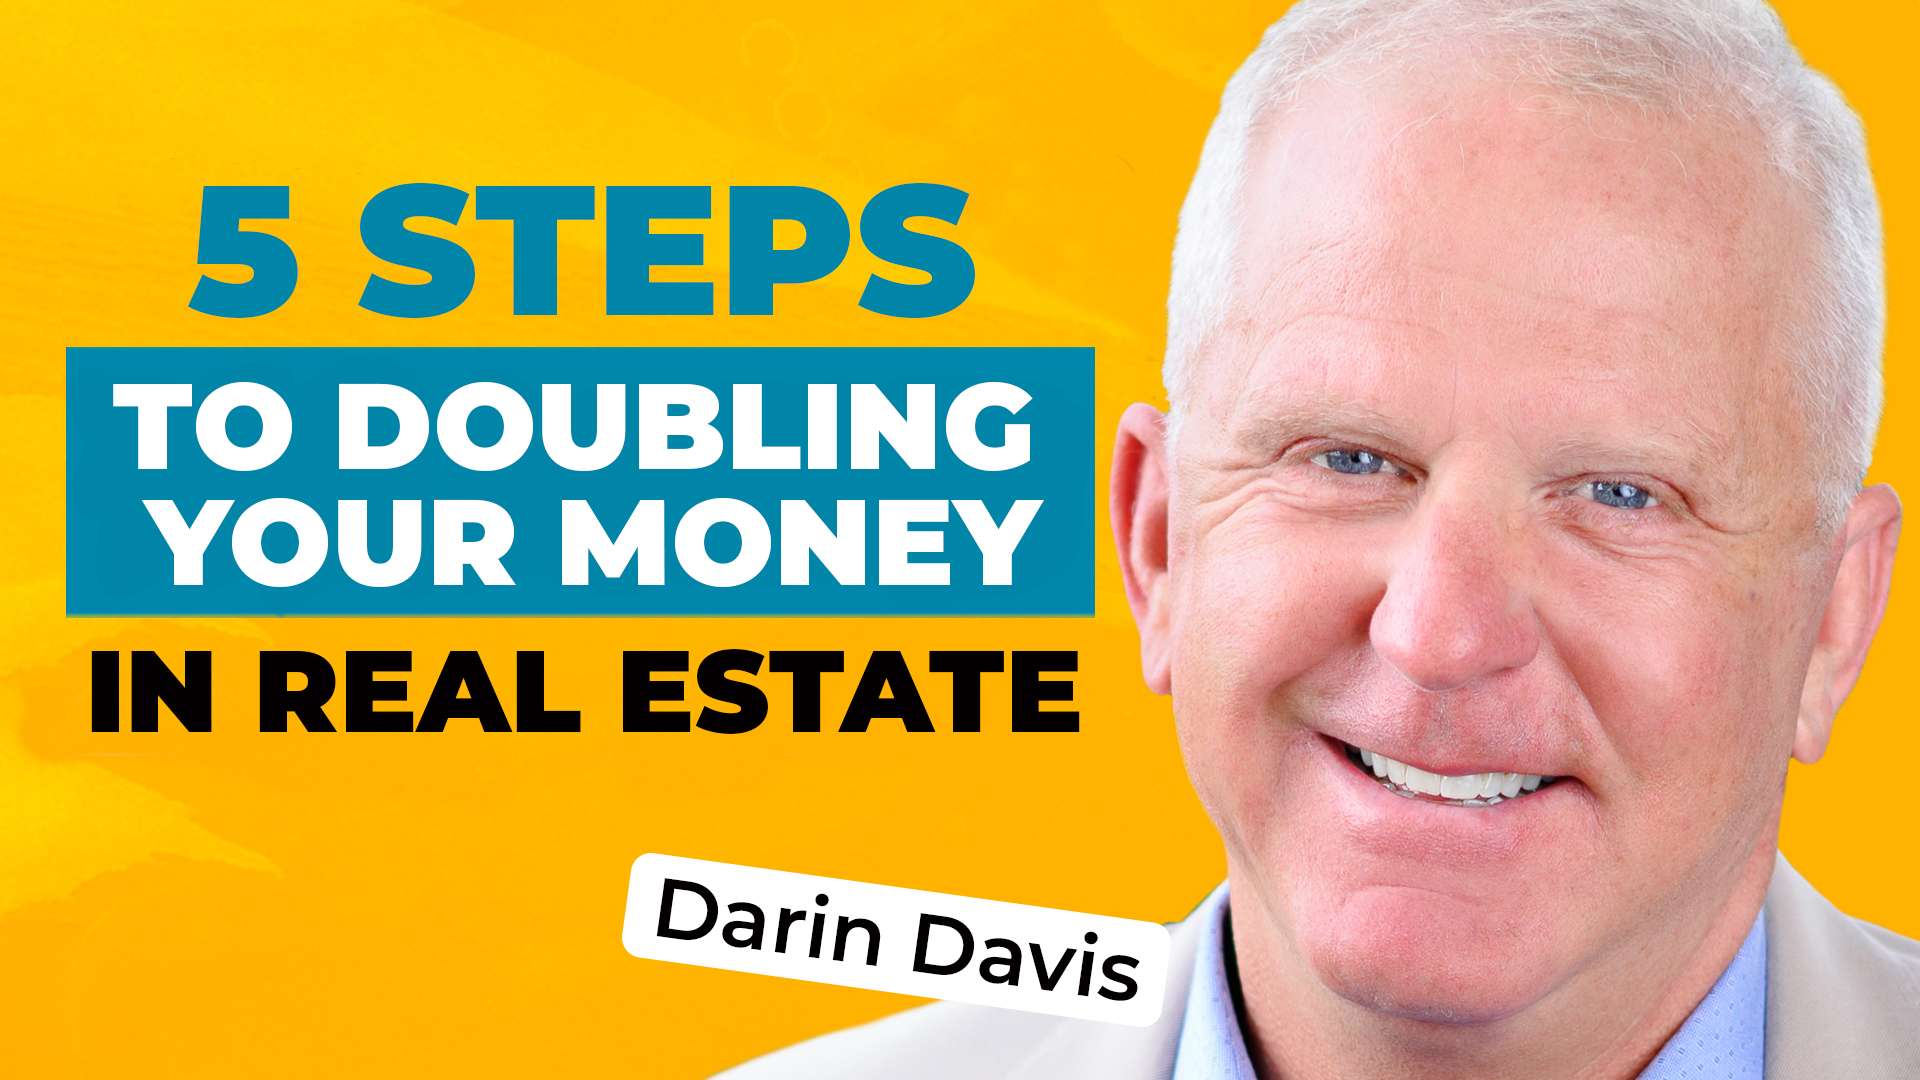 Headshot of Darin Davis on a bold yellow background, along with text reading "5 Steps to Doubling Your Money in Real Estate"